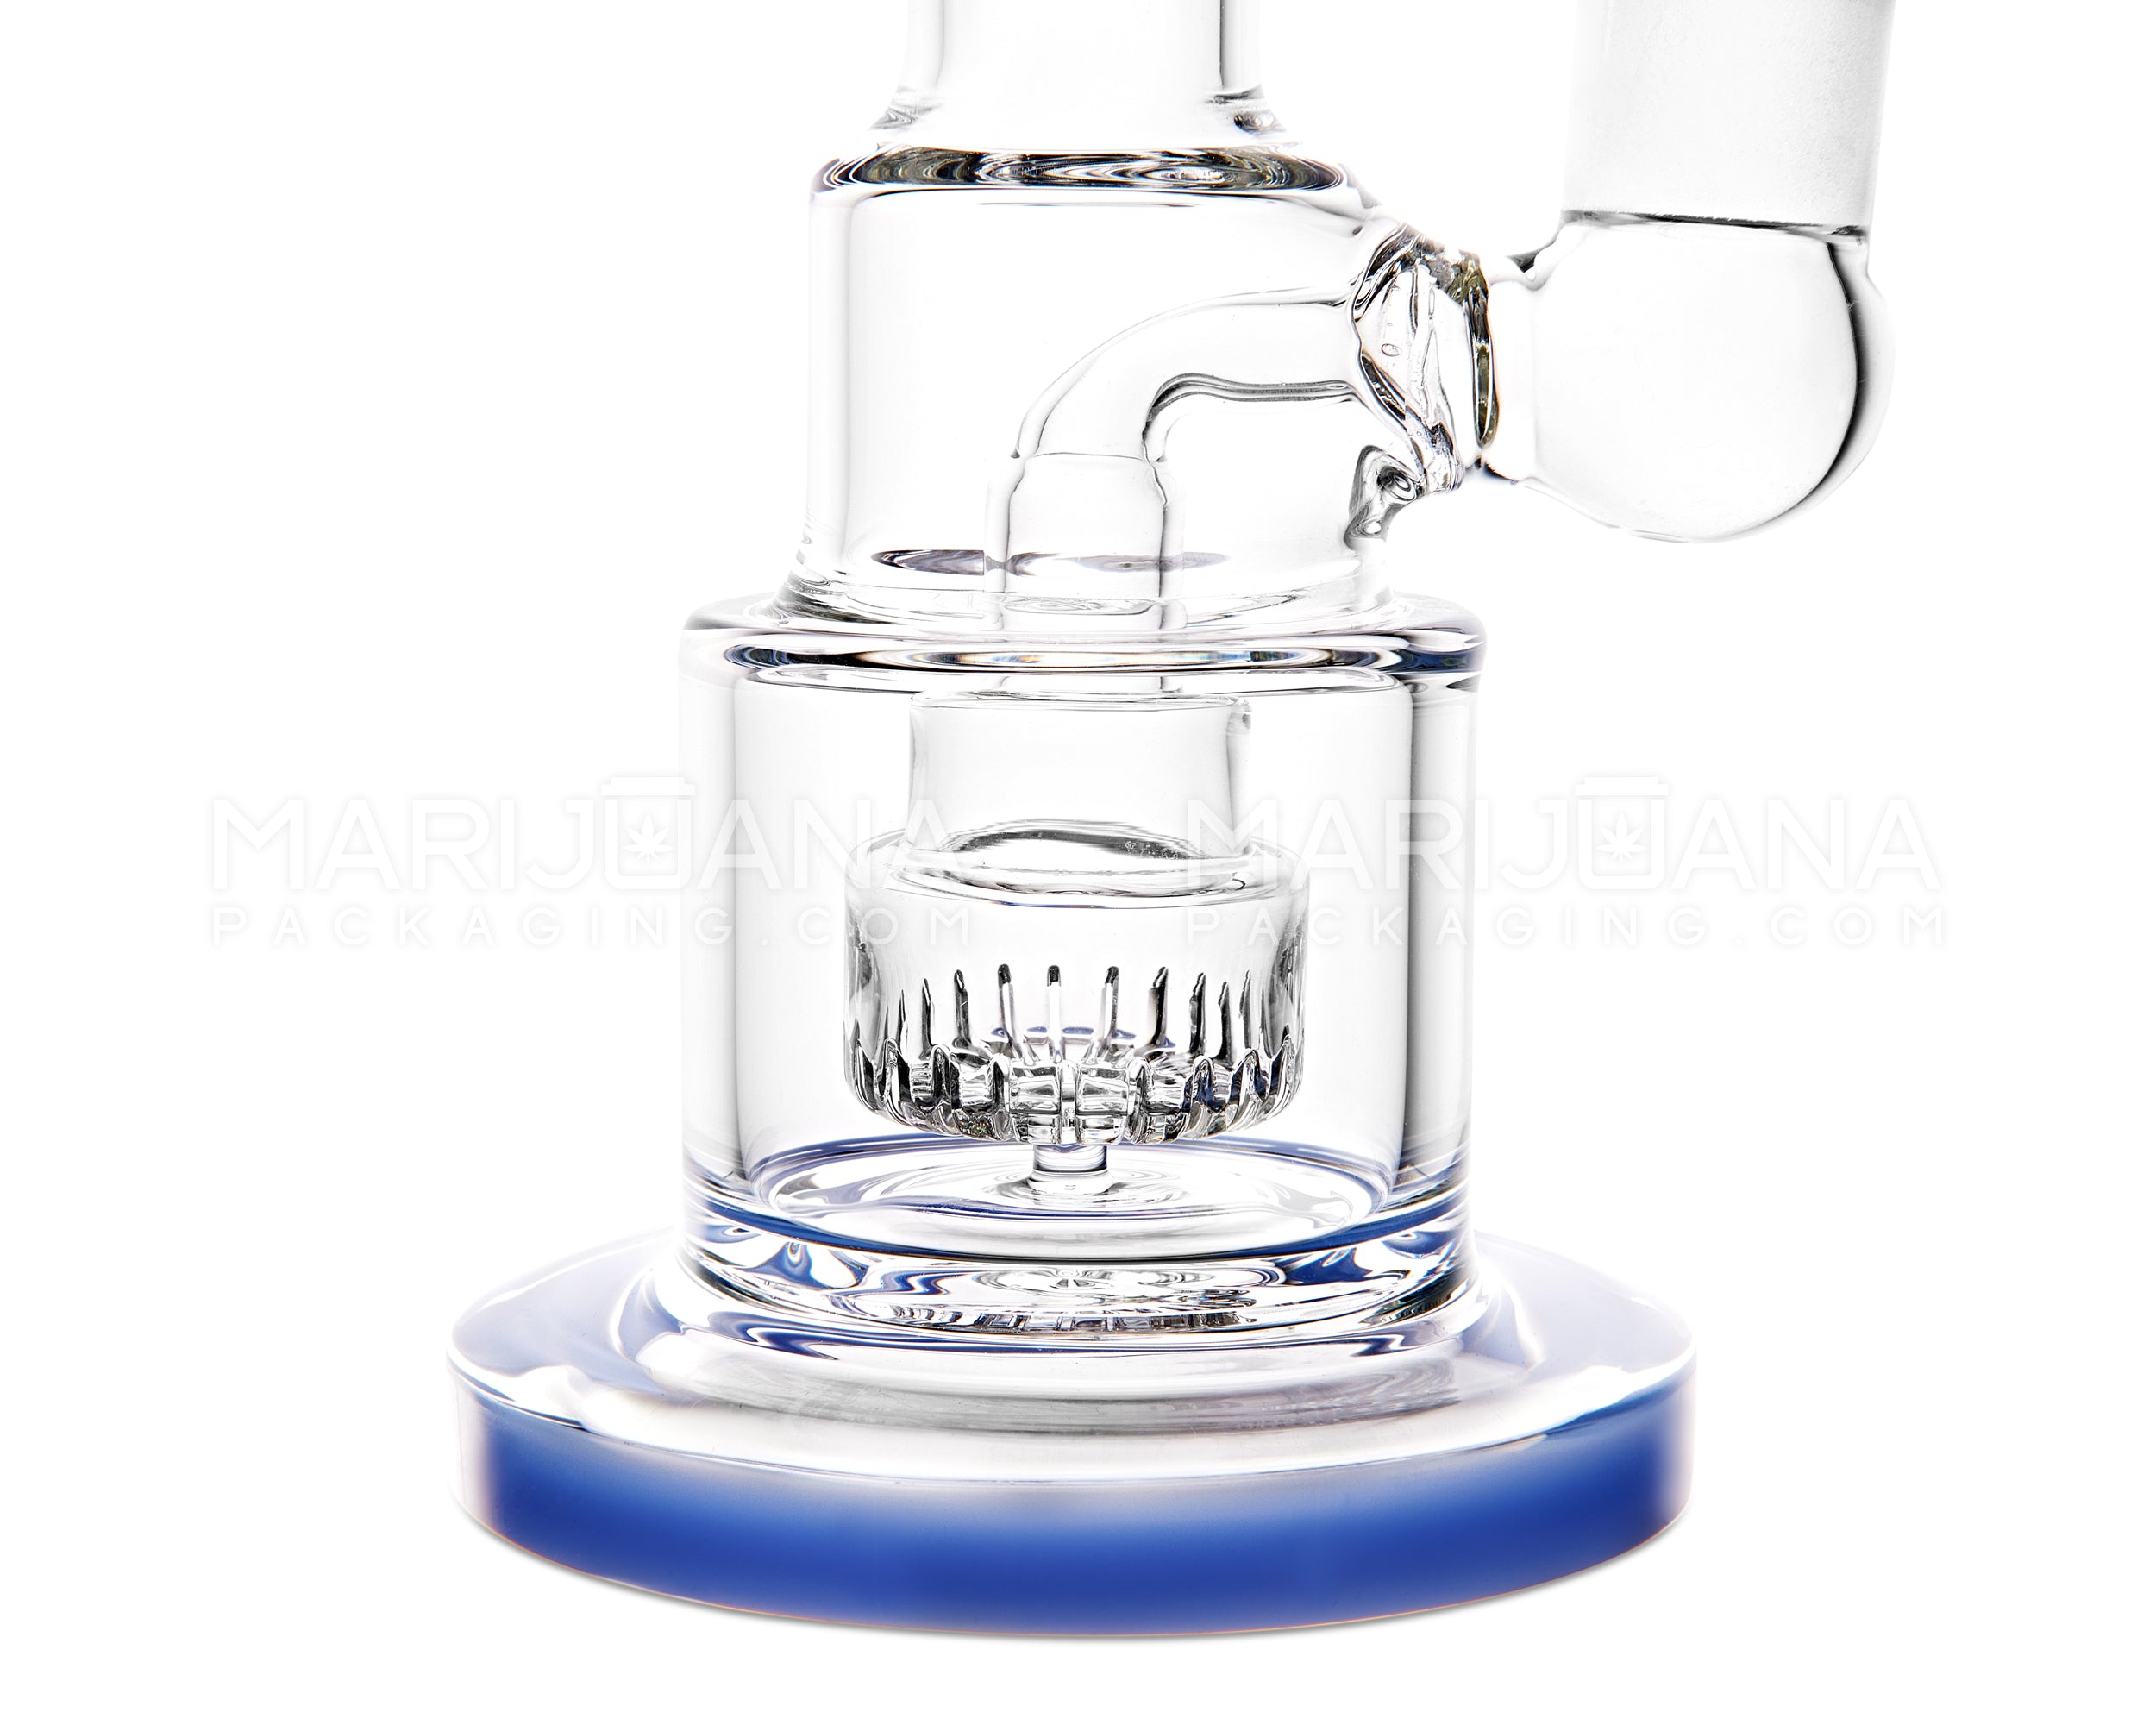 Bent Neck Showerhead Perc Glass Water Pipe w/ Thick Base | 9in Tall - 18mm Bowl - Blue - 3